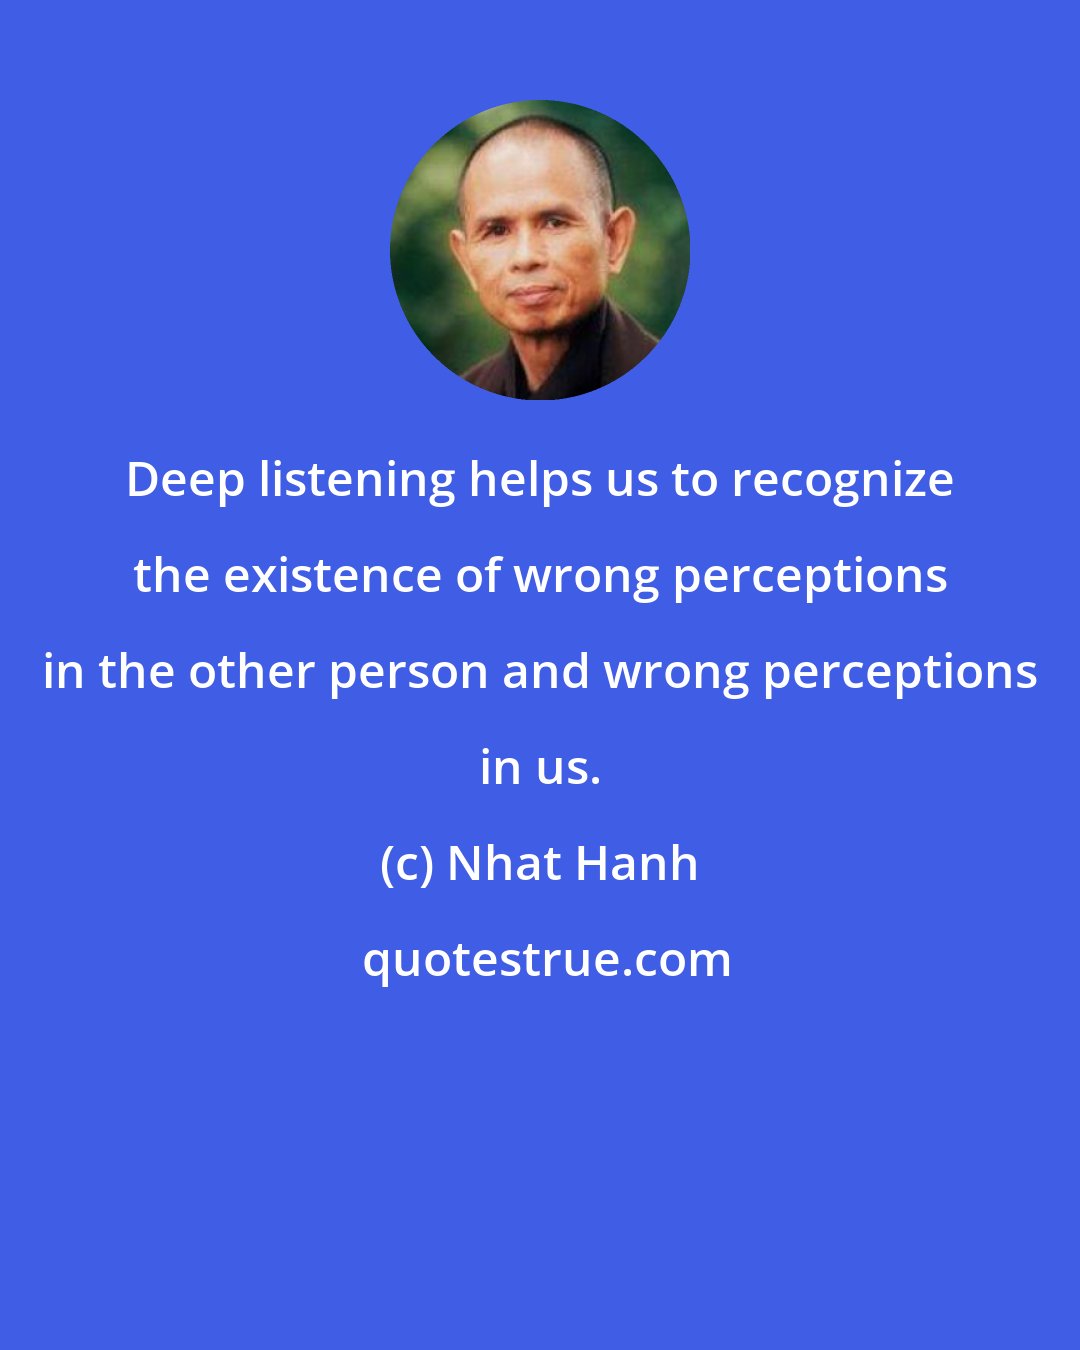 Nhat Hanh: Deep listening helps us to recognize the existence of wrong perceptions in the other person and wrong perceptions in us.